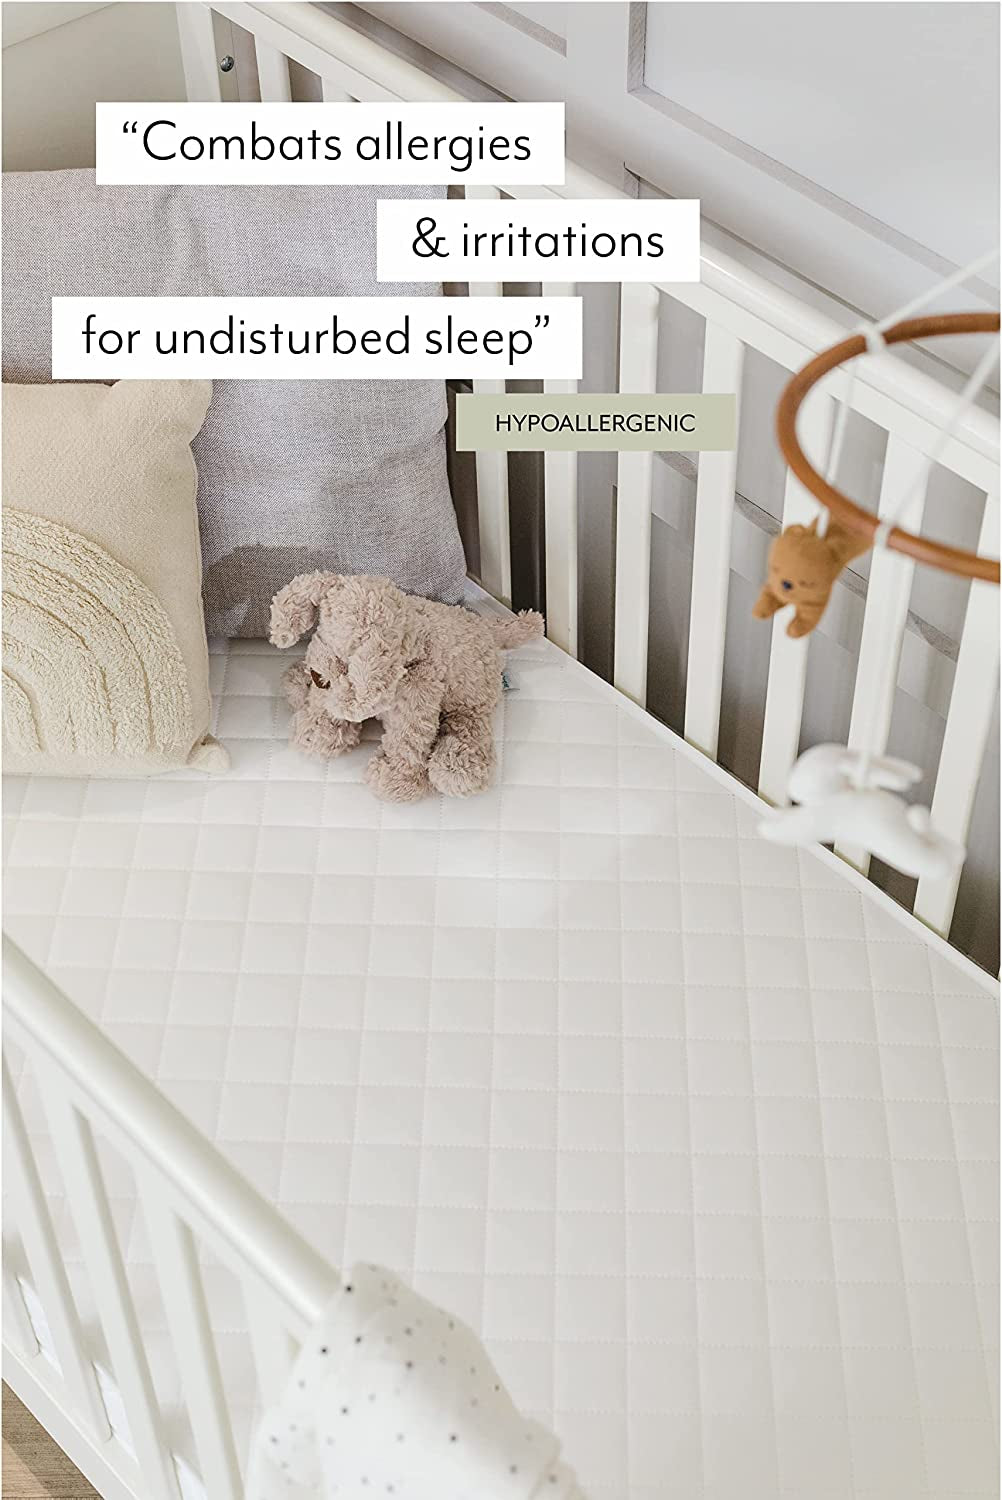 Mother Nurture Waterproof Classic Spring Cot Bed Mattress, White, 140 x 70 x 10cm (with Spare Cover)